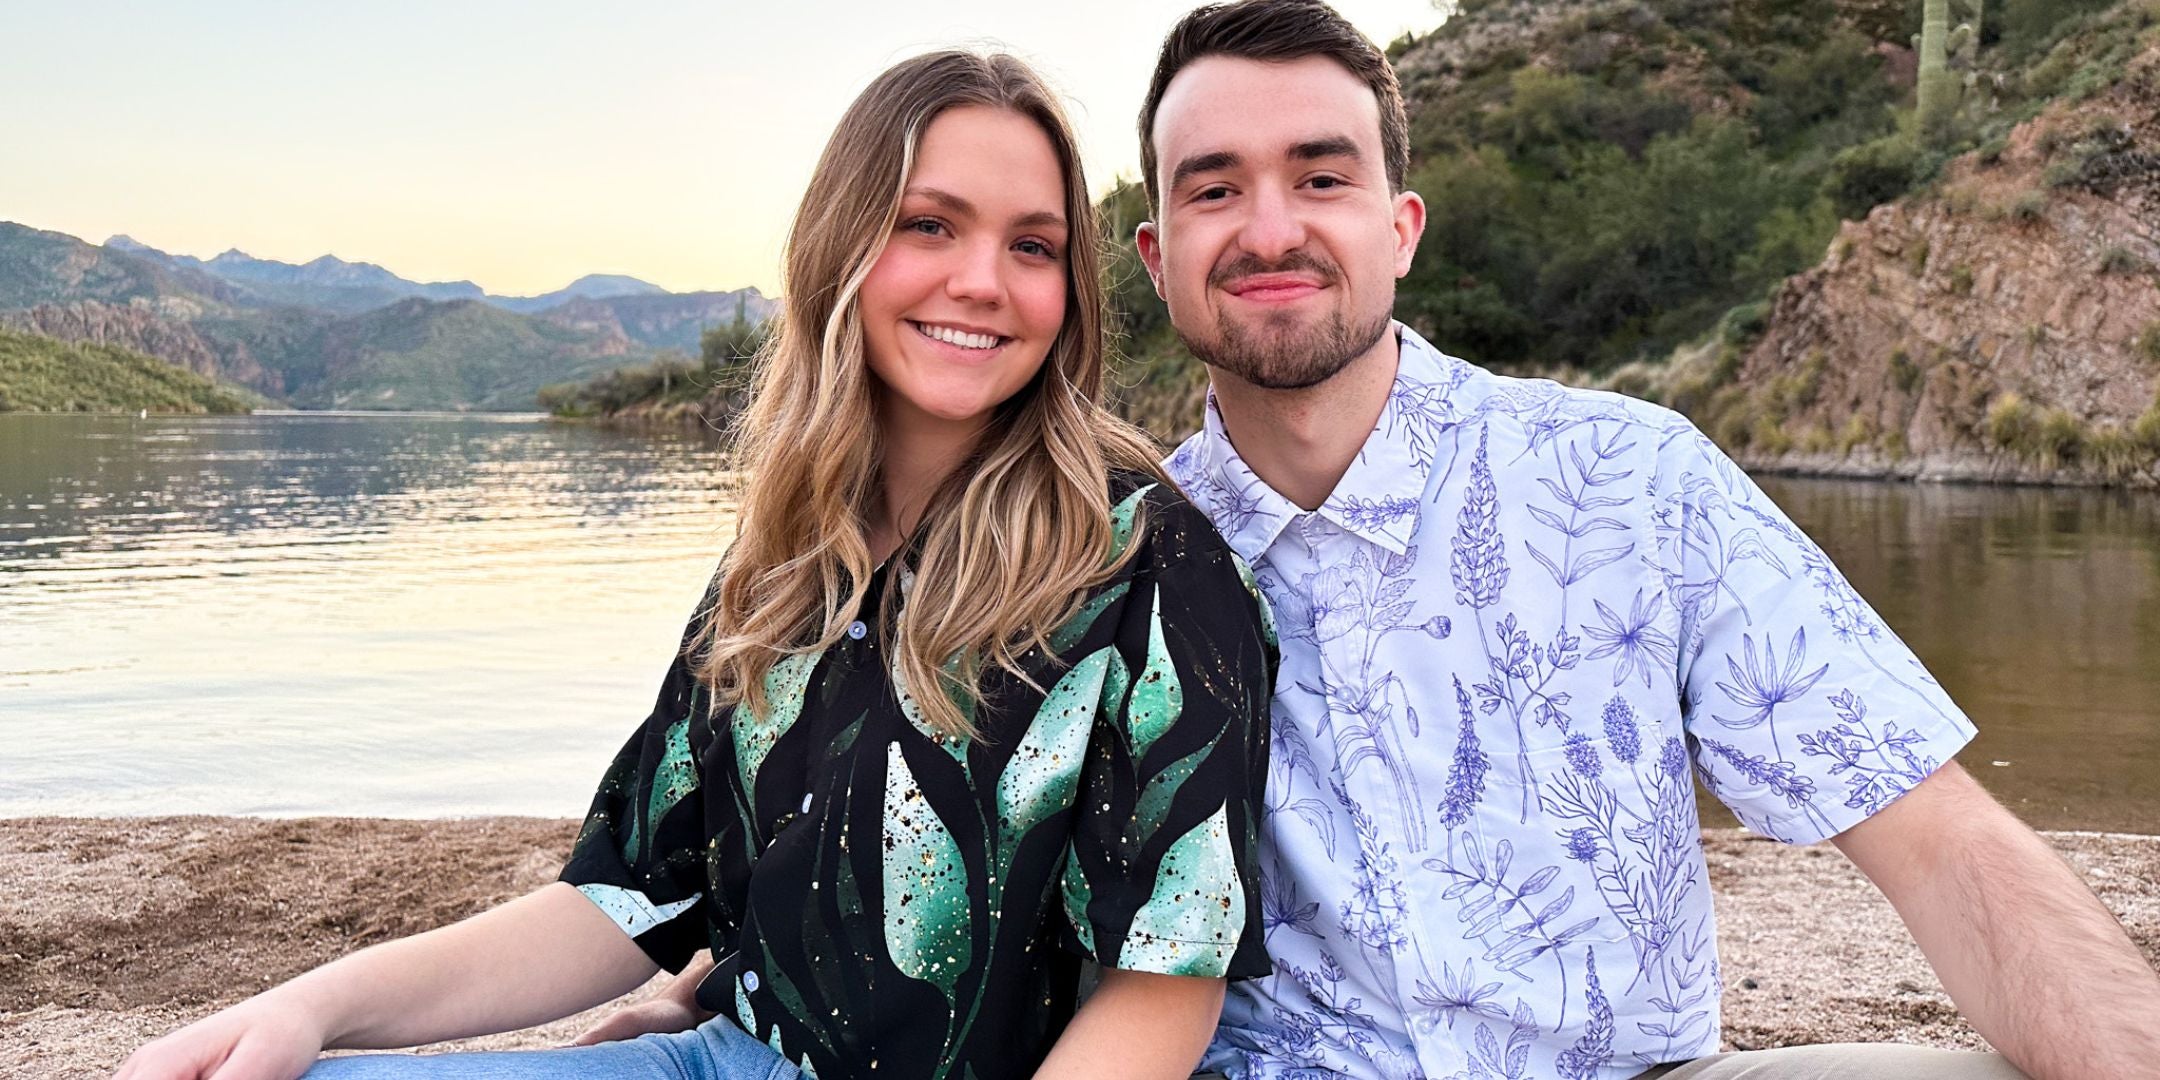 A couple sitting by a lake, both wearing stylish bontany button up shirts with botanical and plant prints. The man is wearing a white Hawaiian shirt with subtle leaves, while the woman is wearing a black botany shirt with green leaves that have mettallic glitter.